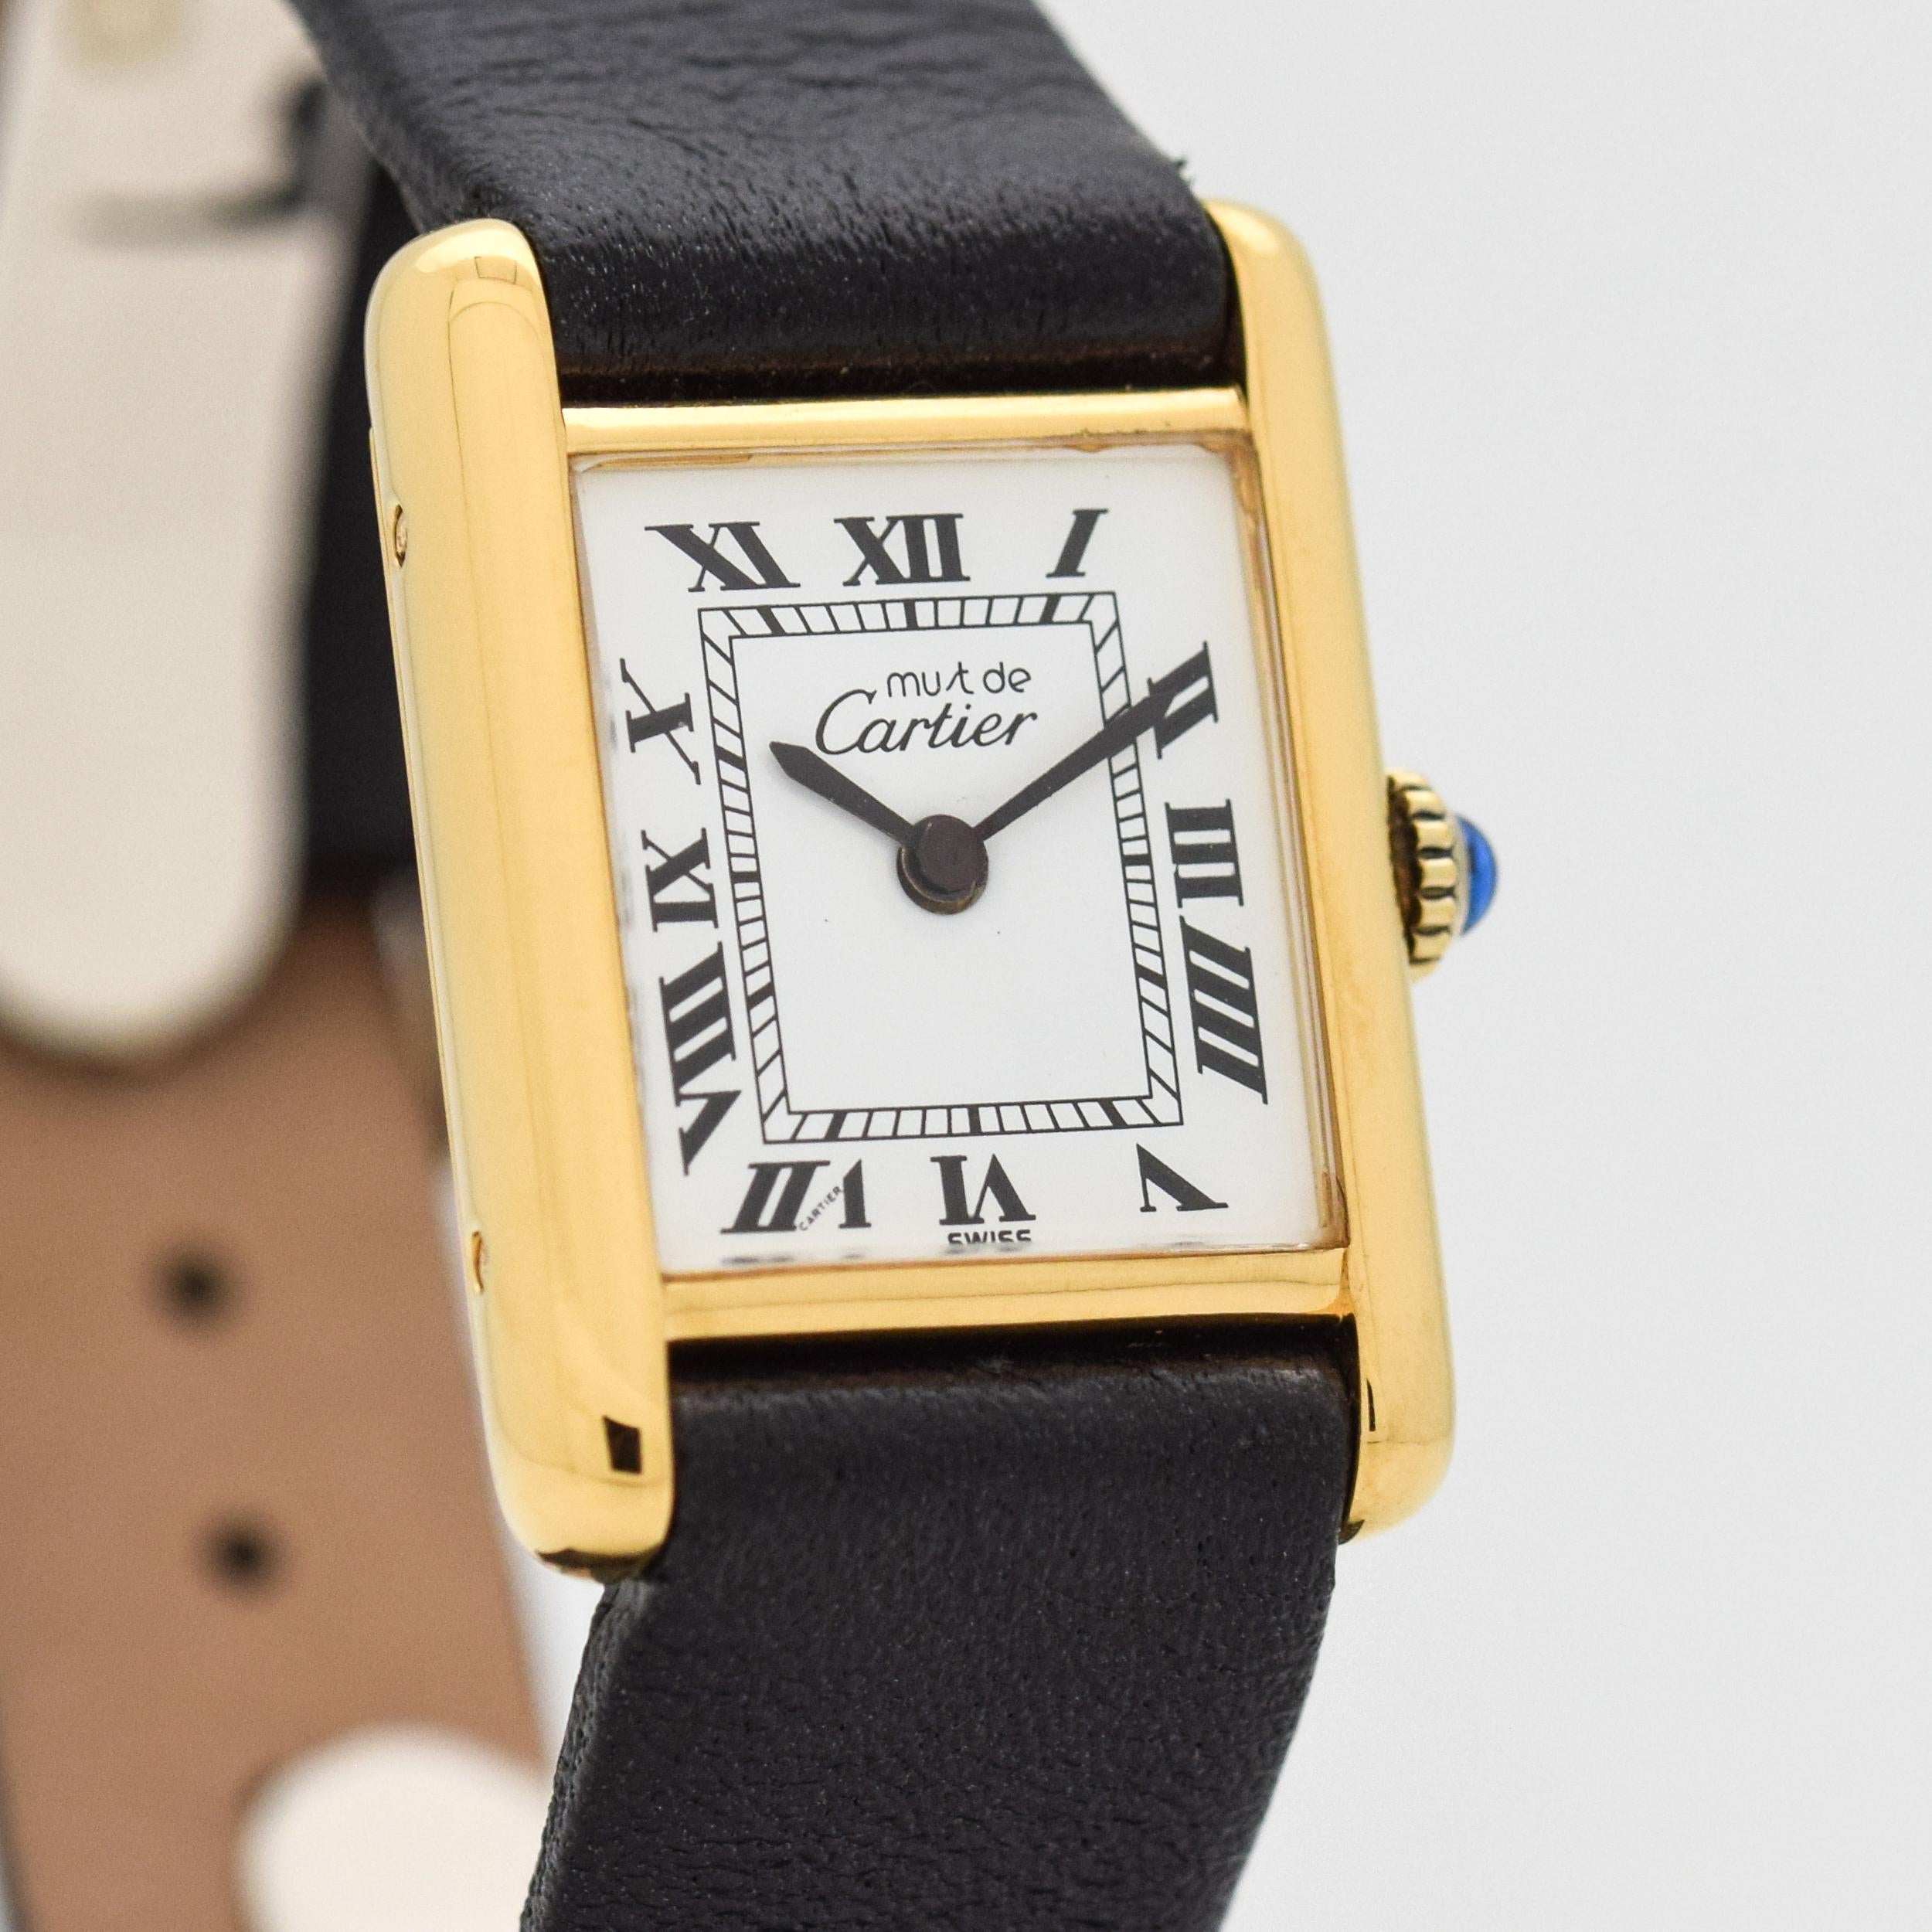 1990's era Cartier Tank Must de Ladies Watch. 18K Yellow Gold Plated over Sterling Silver example. White dial with black-colored, Roman numerals. Powered by a 17-jewel, manual caliber ETA movement. Equipped with a Genuine Calf Leather Black-colored